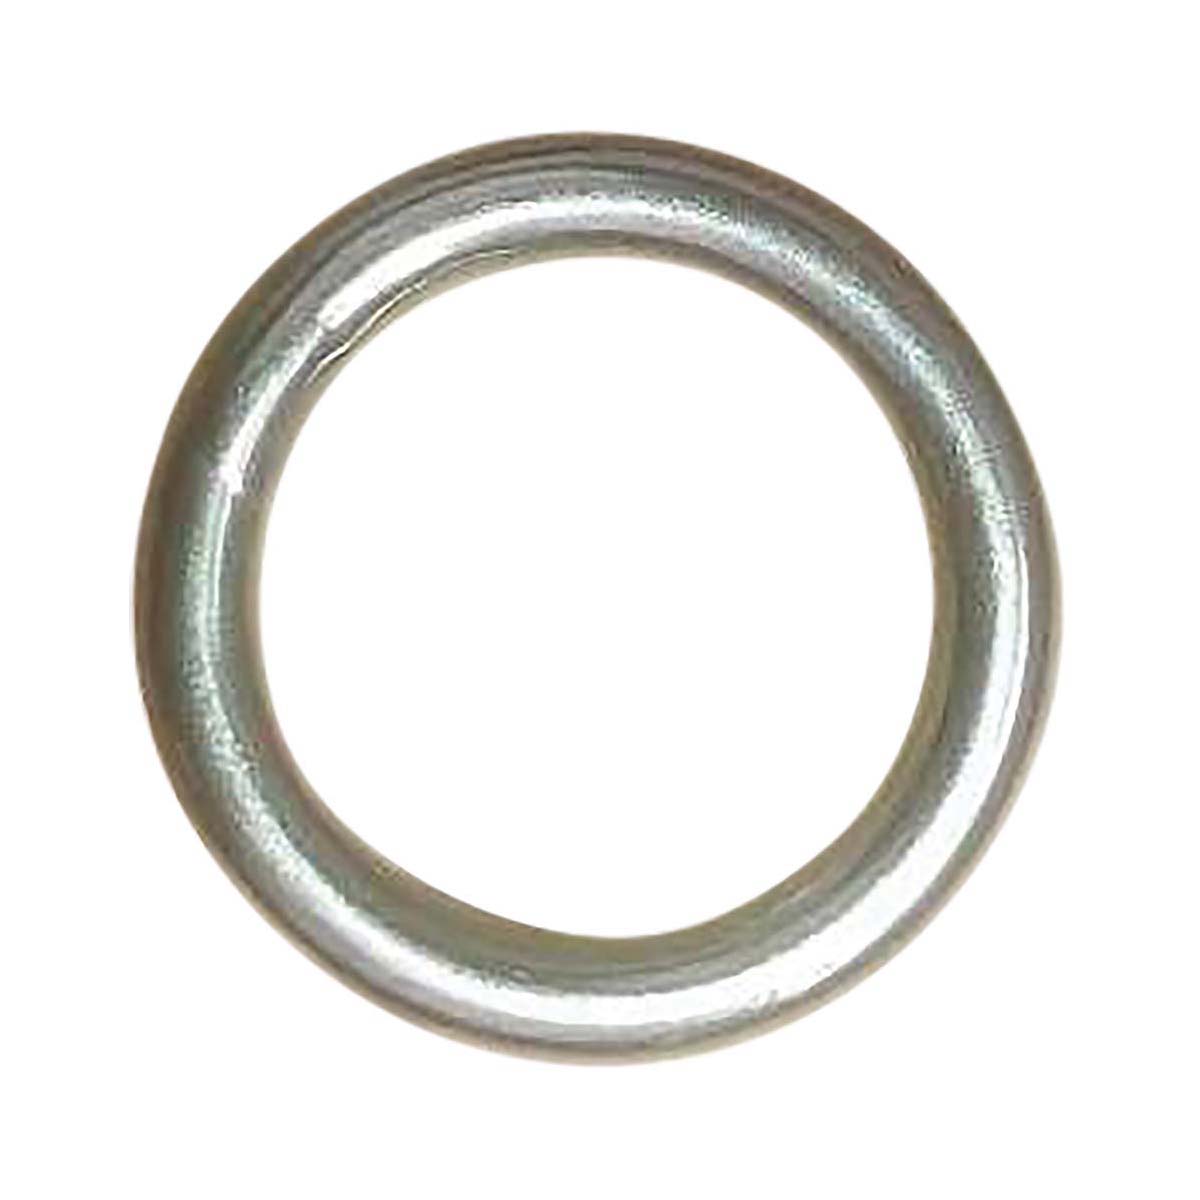 Blueline Stainless Steel Ring 5x25mm